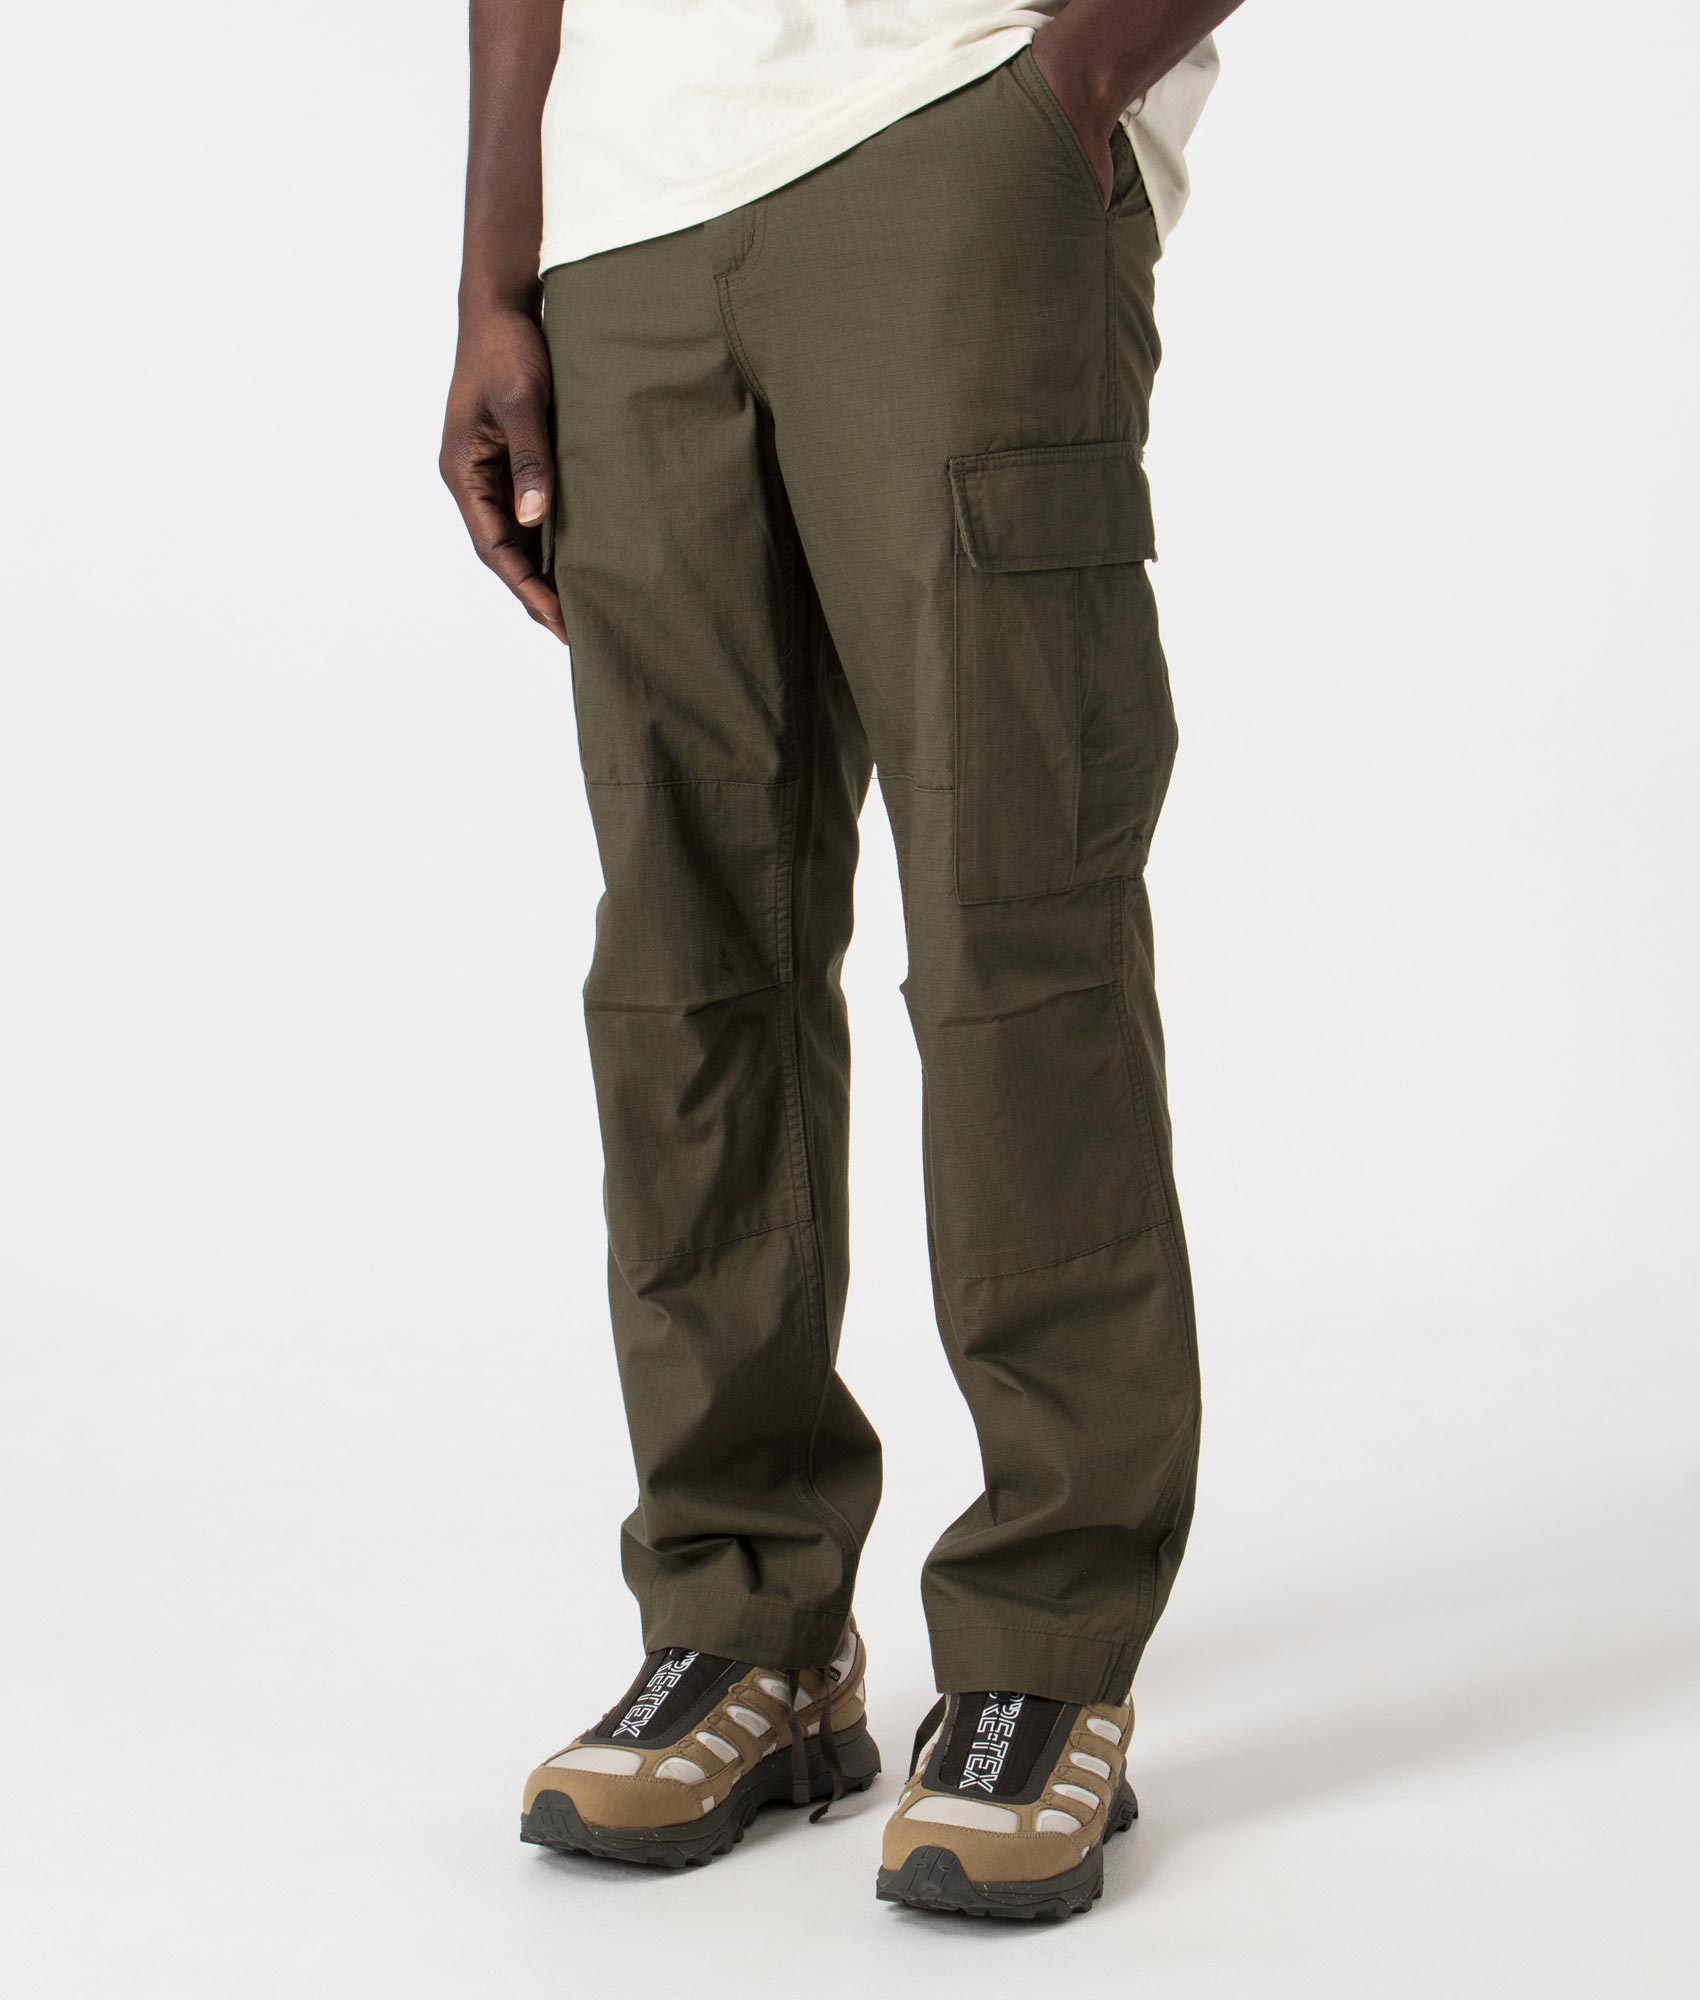 Carhartt WIP Mens Regular Fit Cargo Pants - Colour: 6302 Cypress Rinsed - Size: 30R